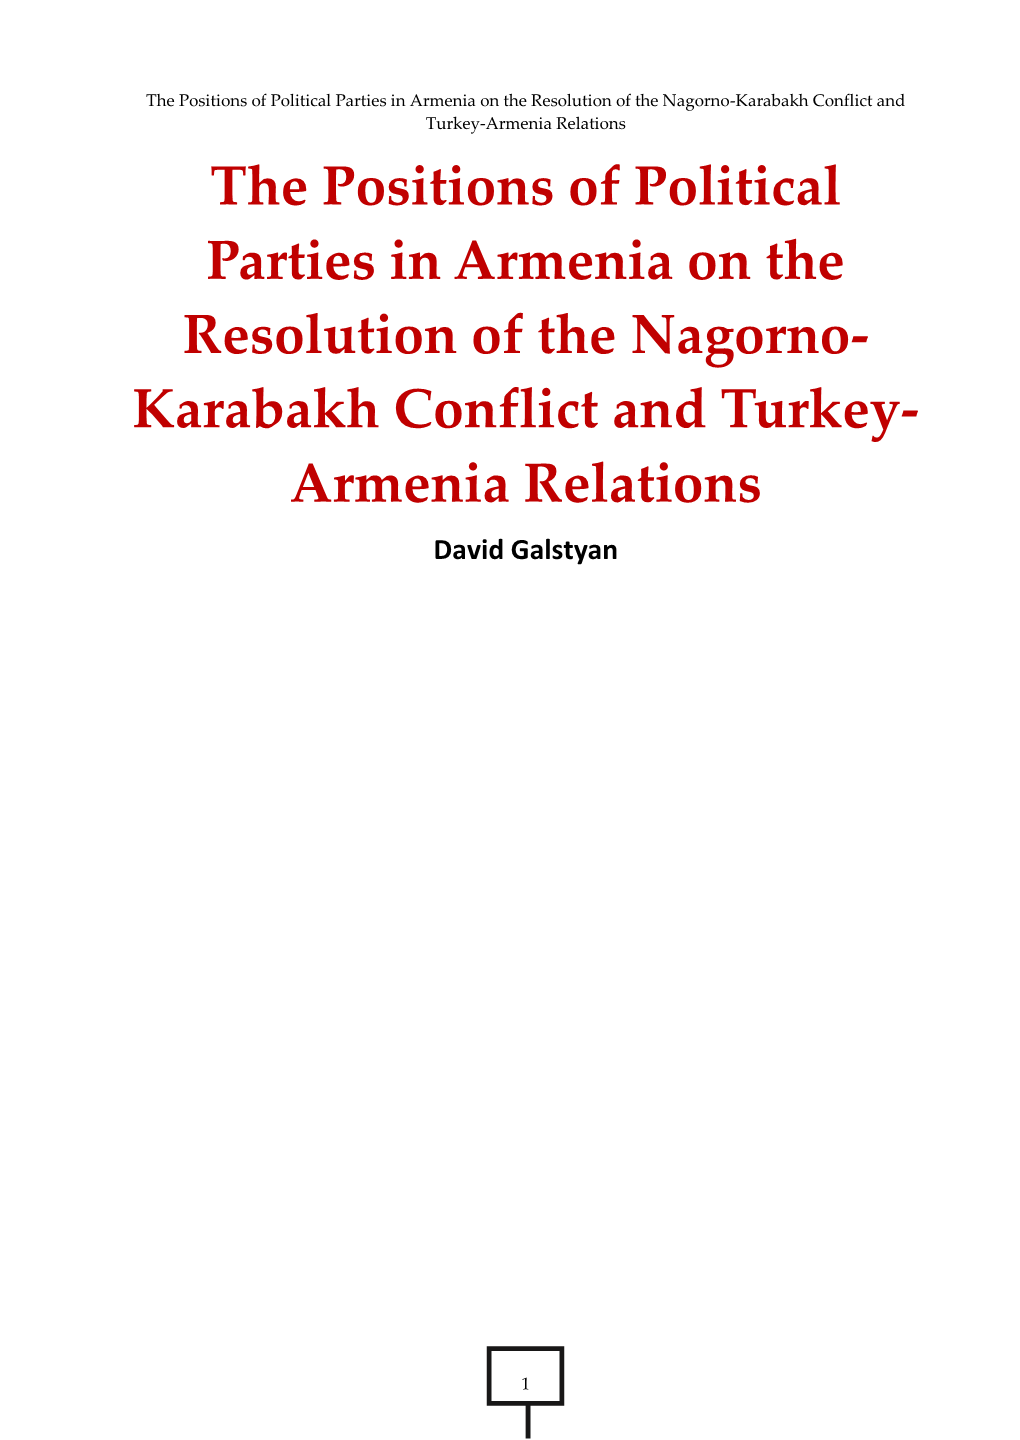 The Positions of Political Parties in Armenia On